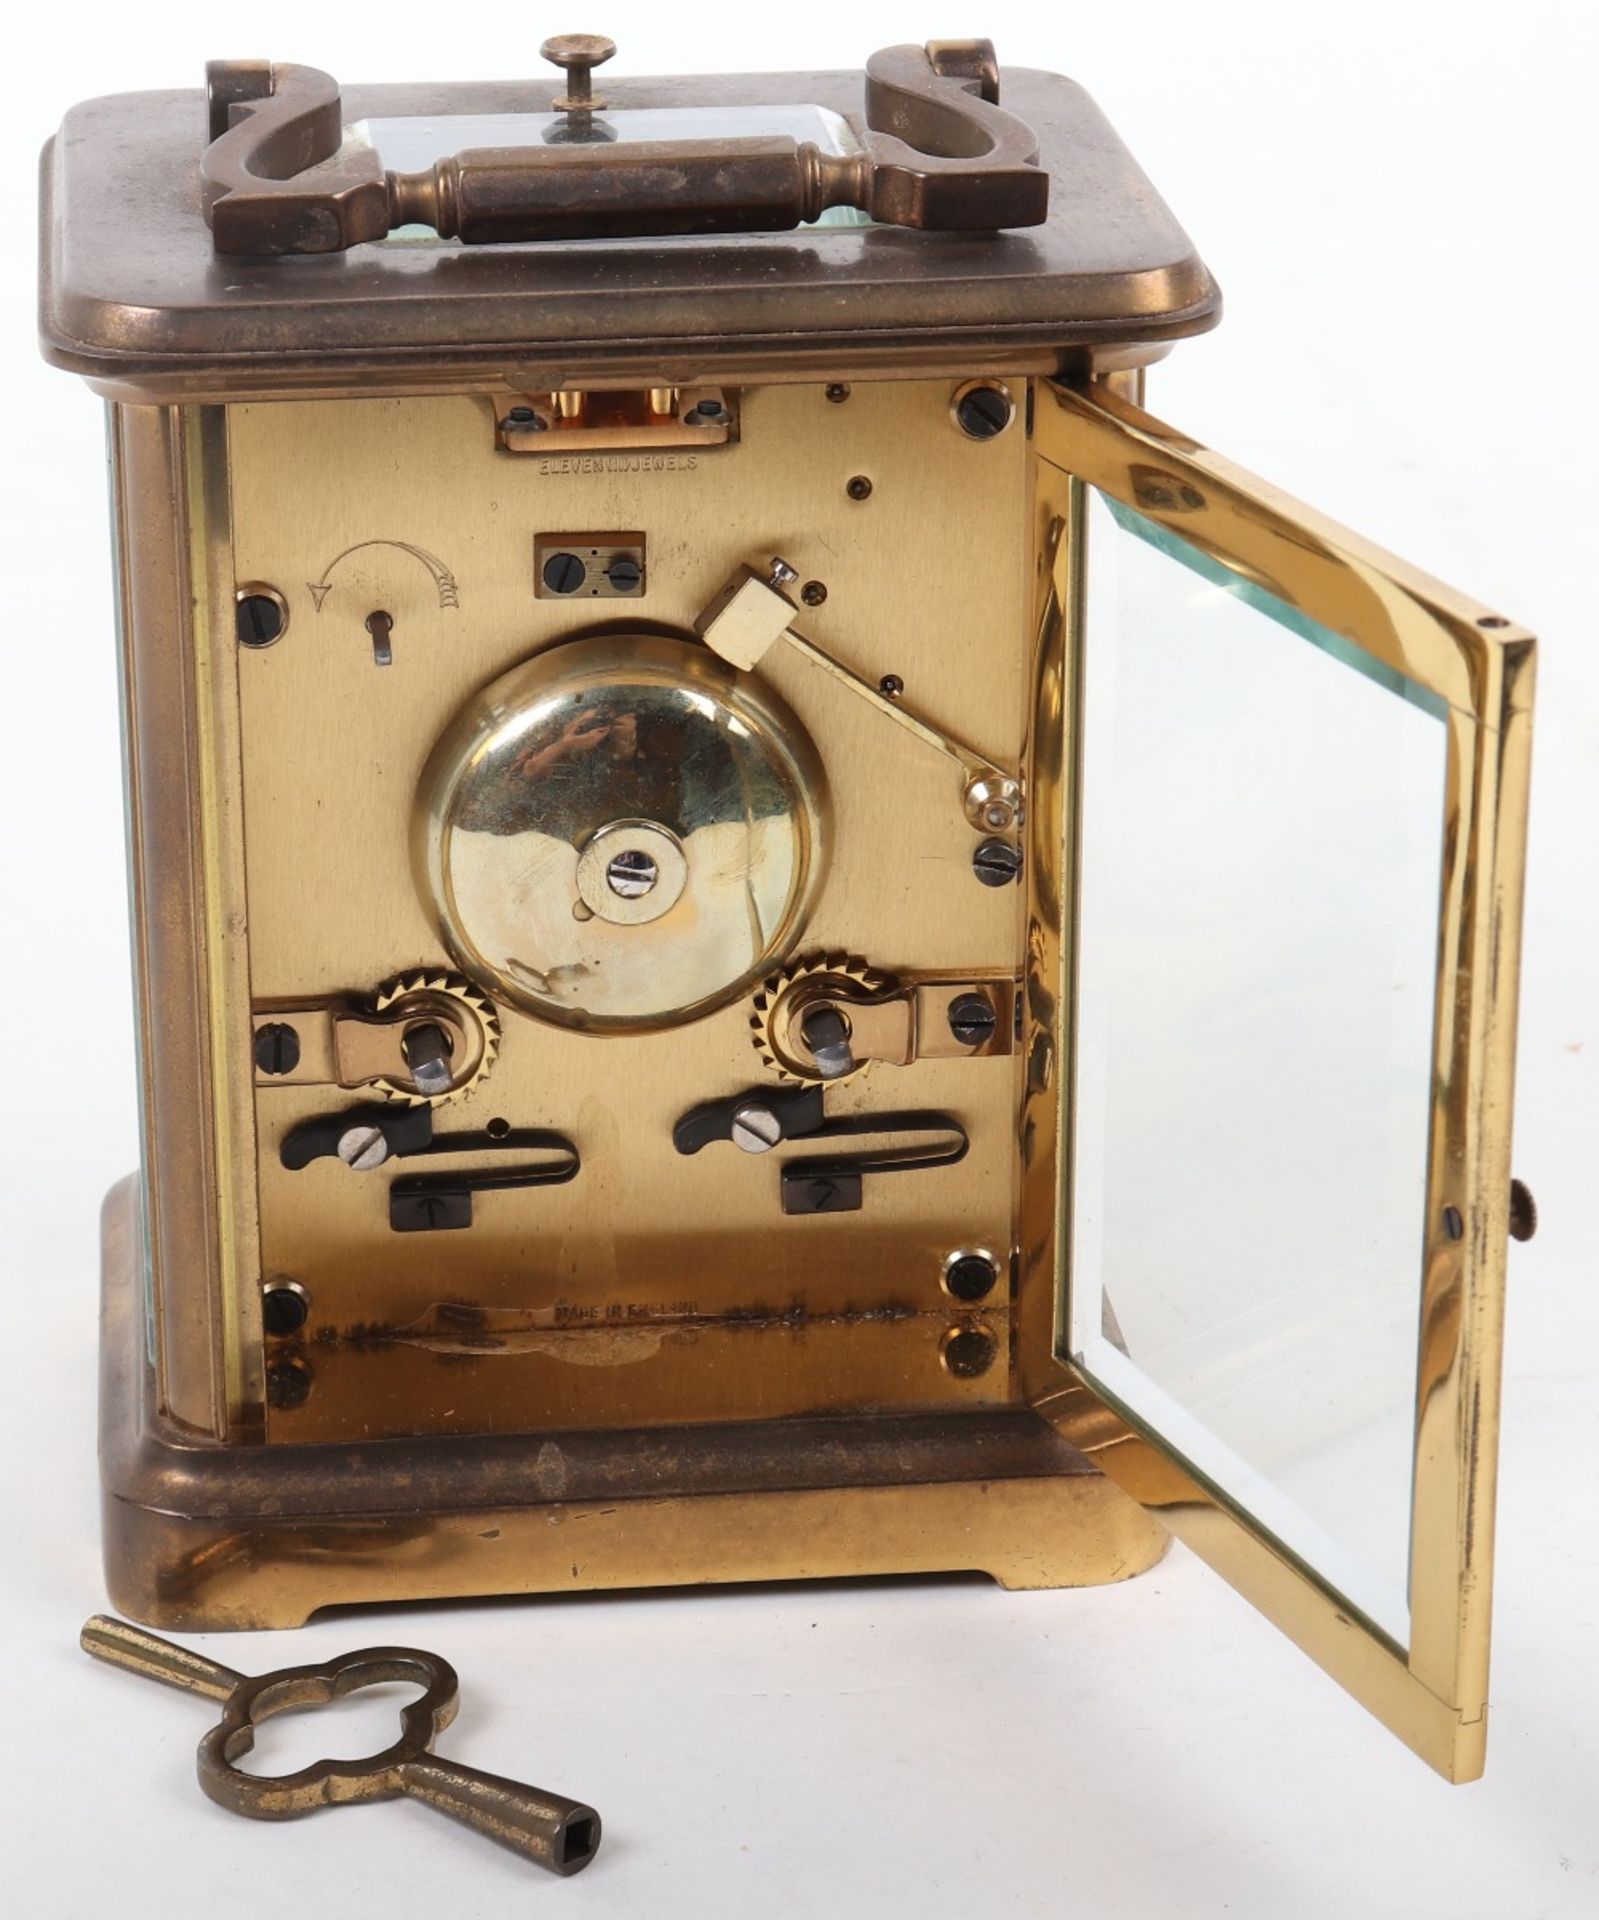 A 20th century brass carriage clock, signed Charles Frodsham London - Image 7 of 8